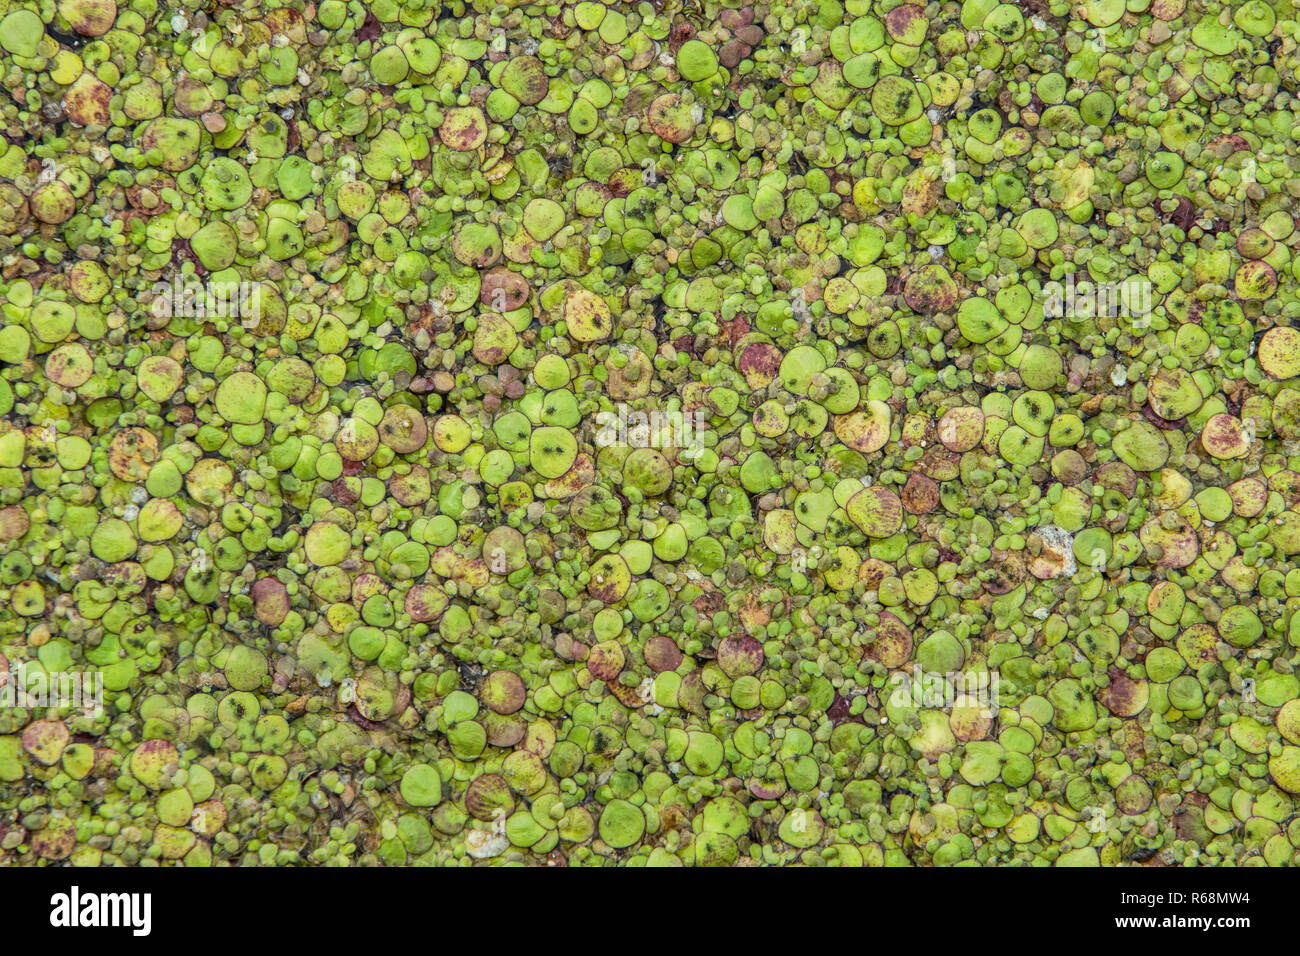 Duckweed and other plant material floating on the water surface Stock Photo